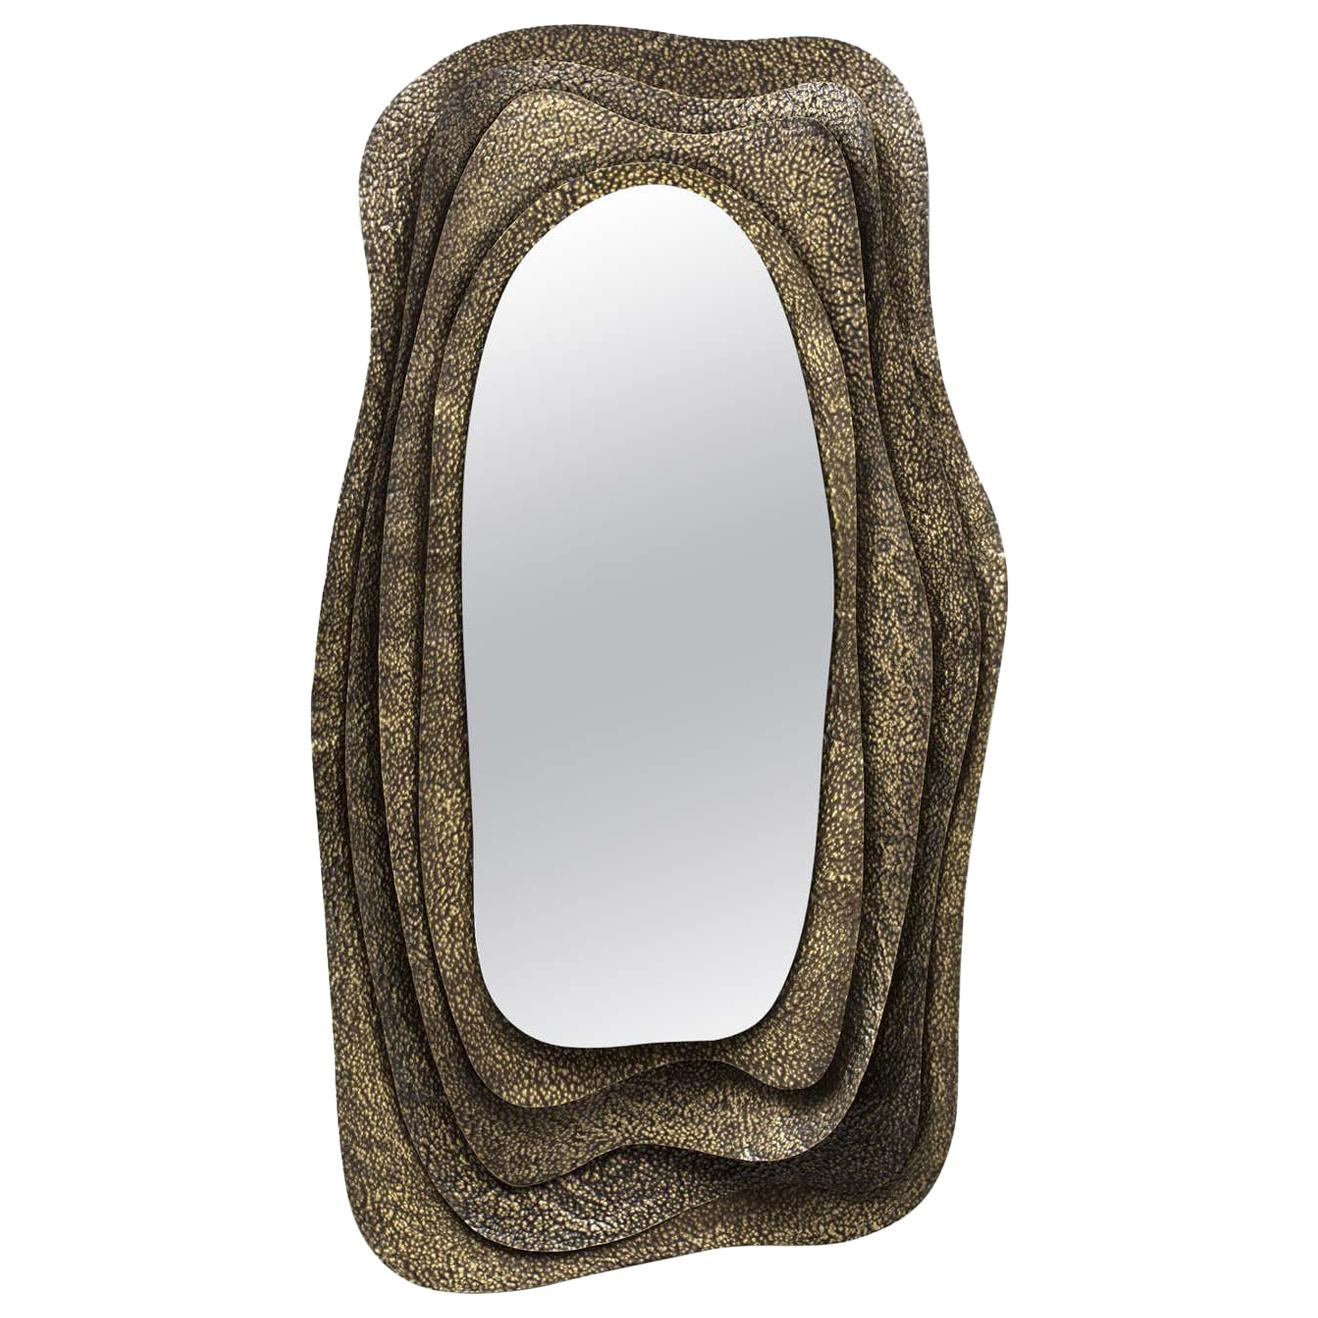 Mirror Puddle For Sale